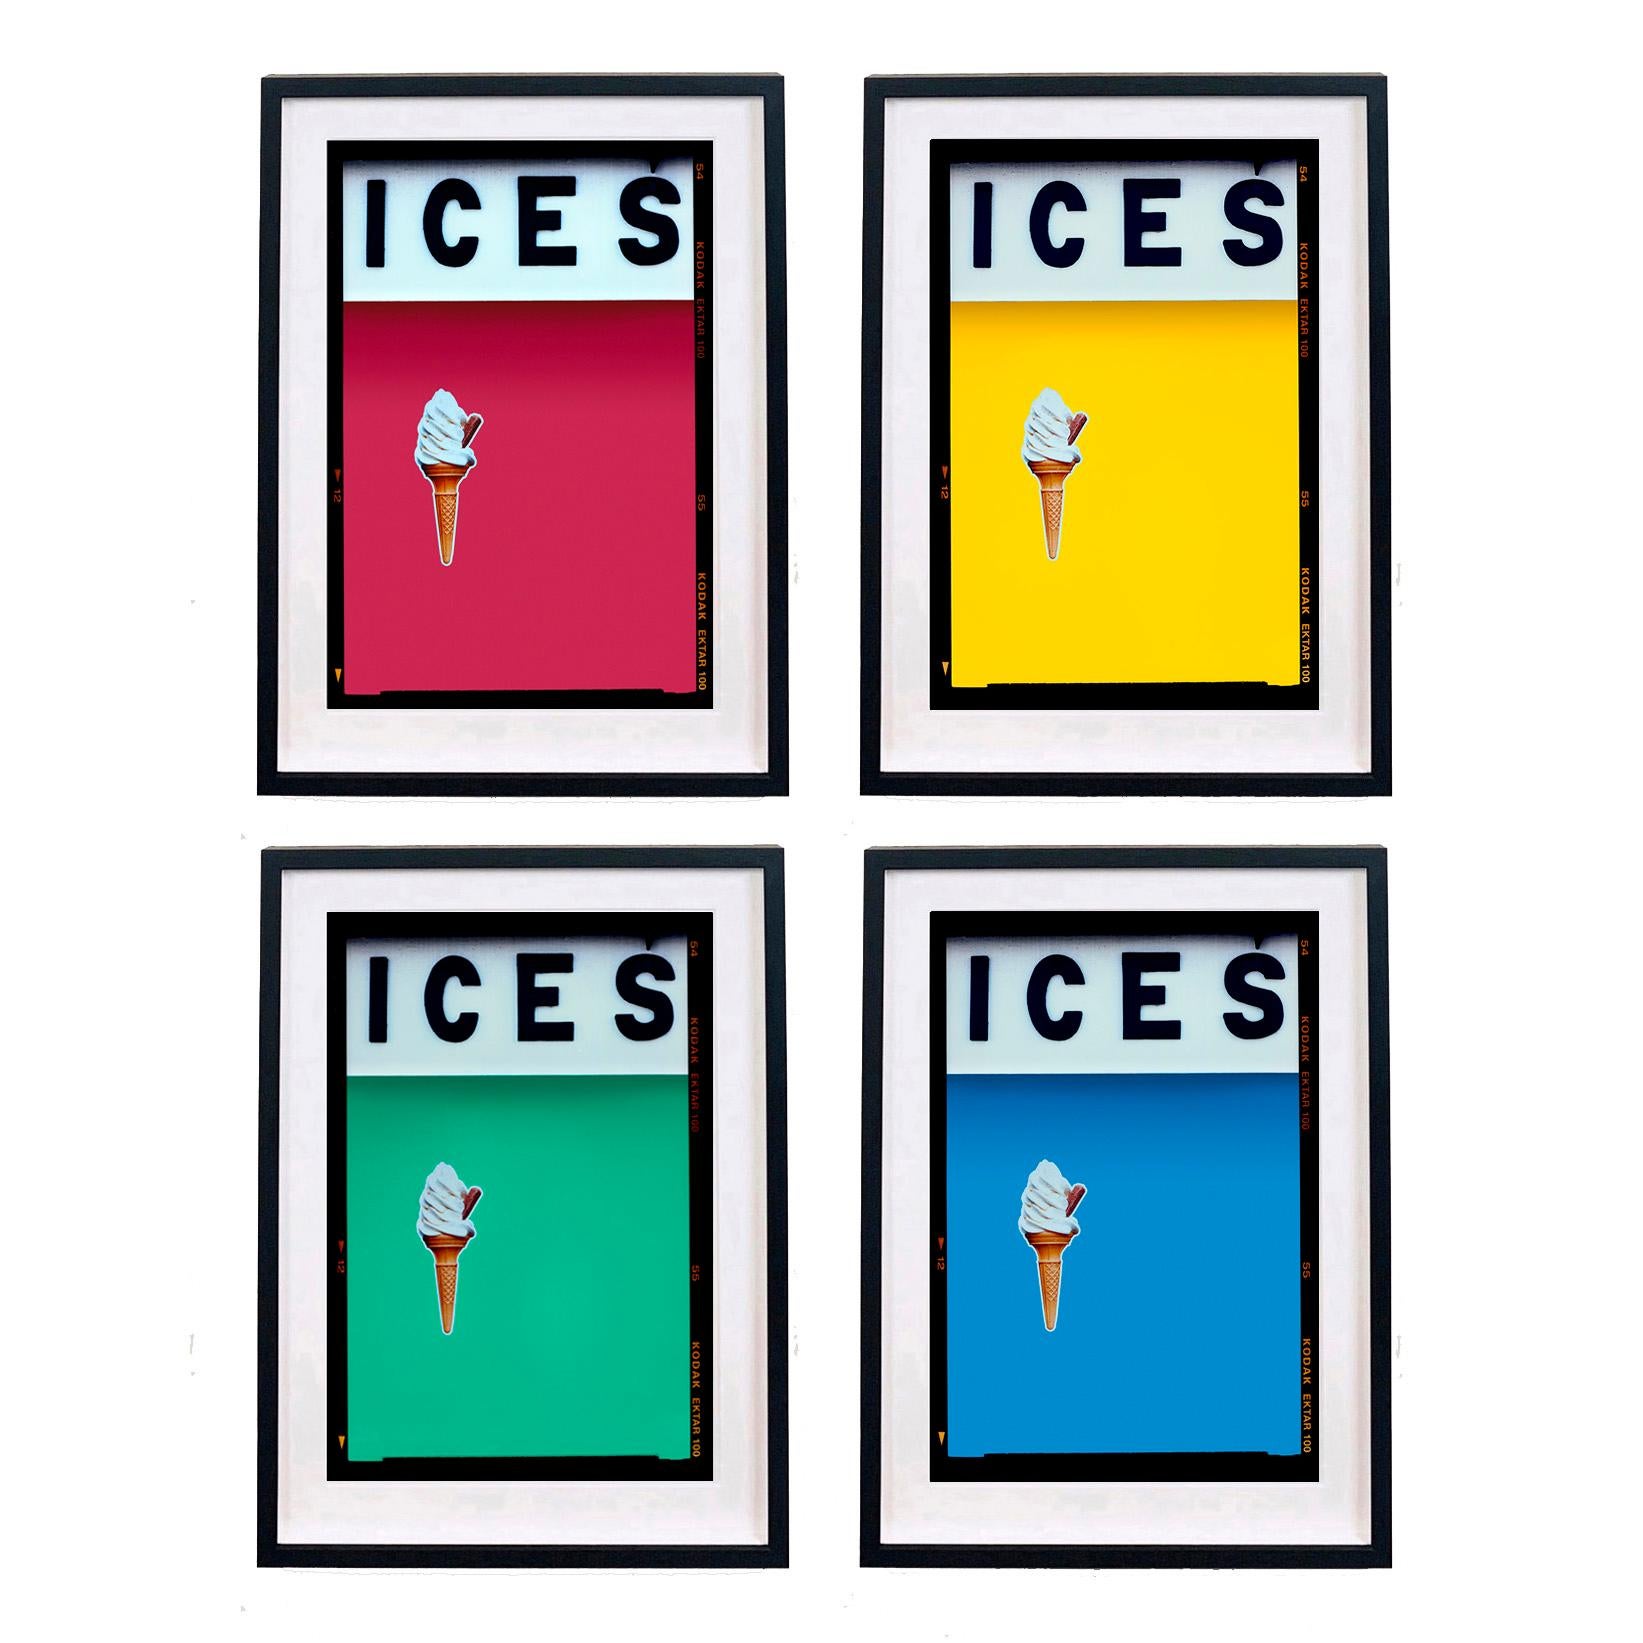 ICES - Four Framed Artworks, Photographs by Richard Heeps. Select your color pairing.

ICES, by Richard Heeps, photographed at the British Seaside at the end of summer 2020. This artwork is about evoking memories of the simple joy of days by the